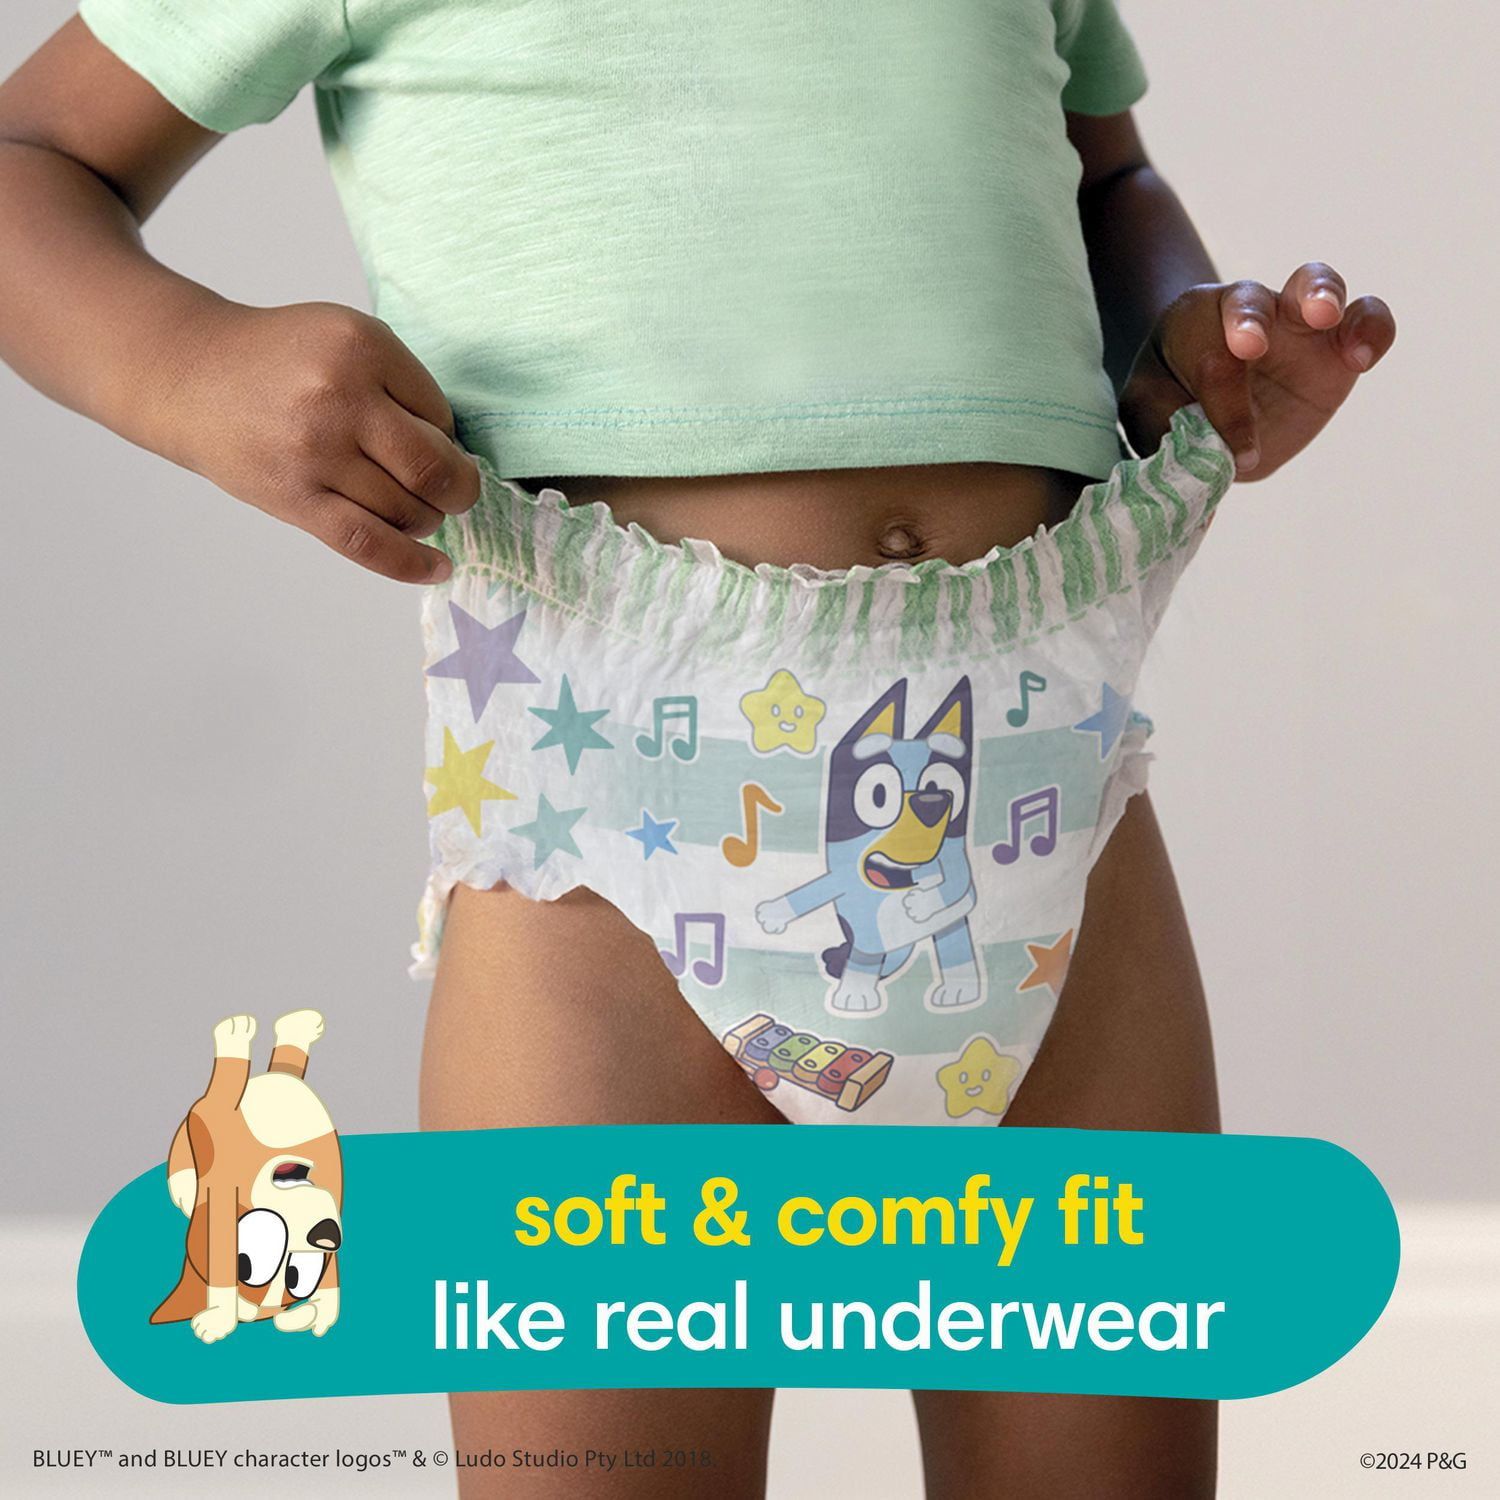 Pampers Easy Ups Training Pants Boys and Girls, 2T-3T, 74 Count